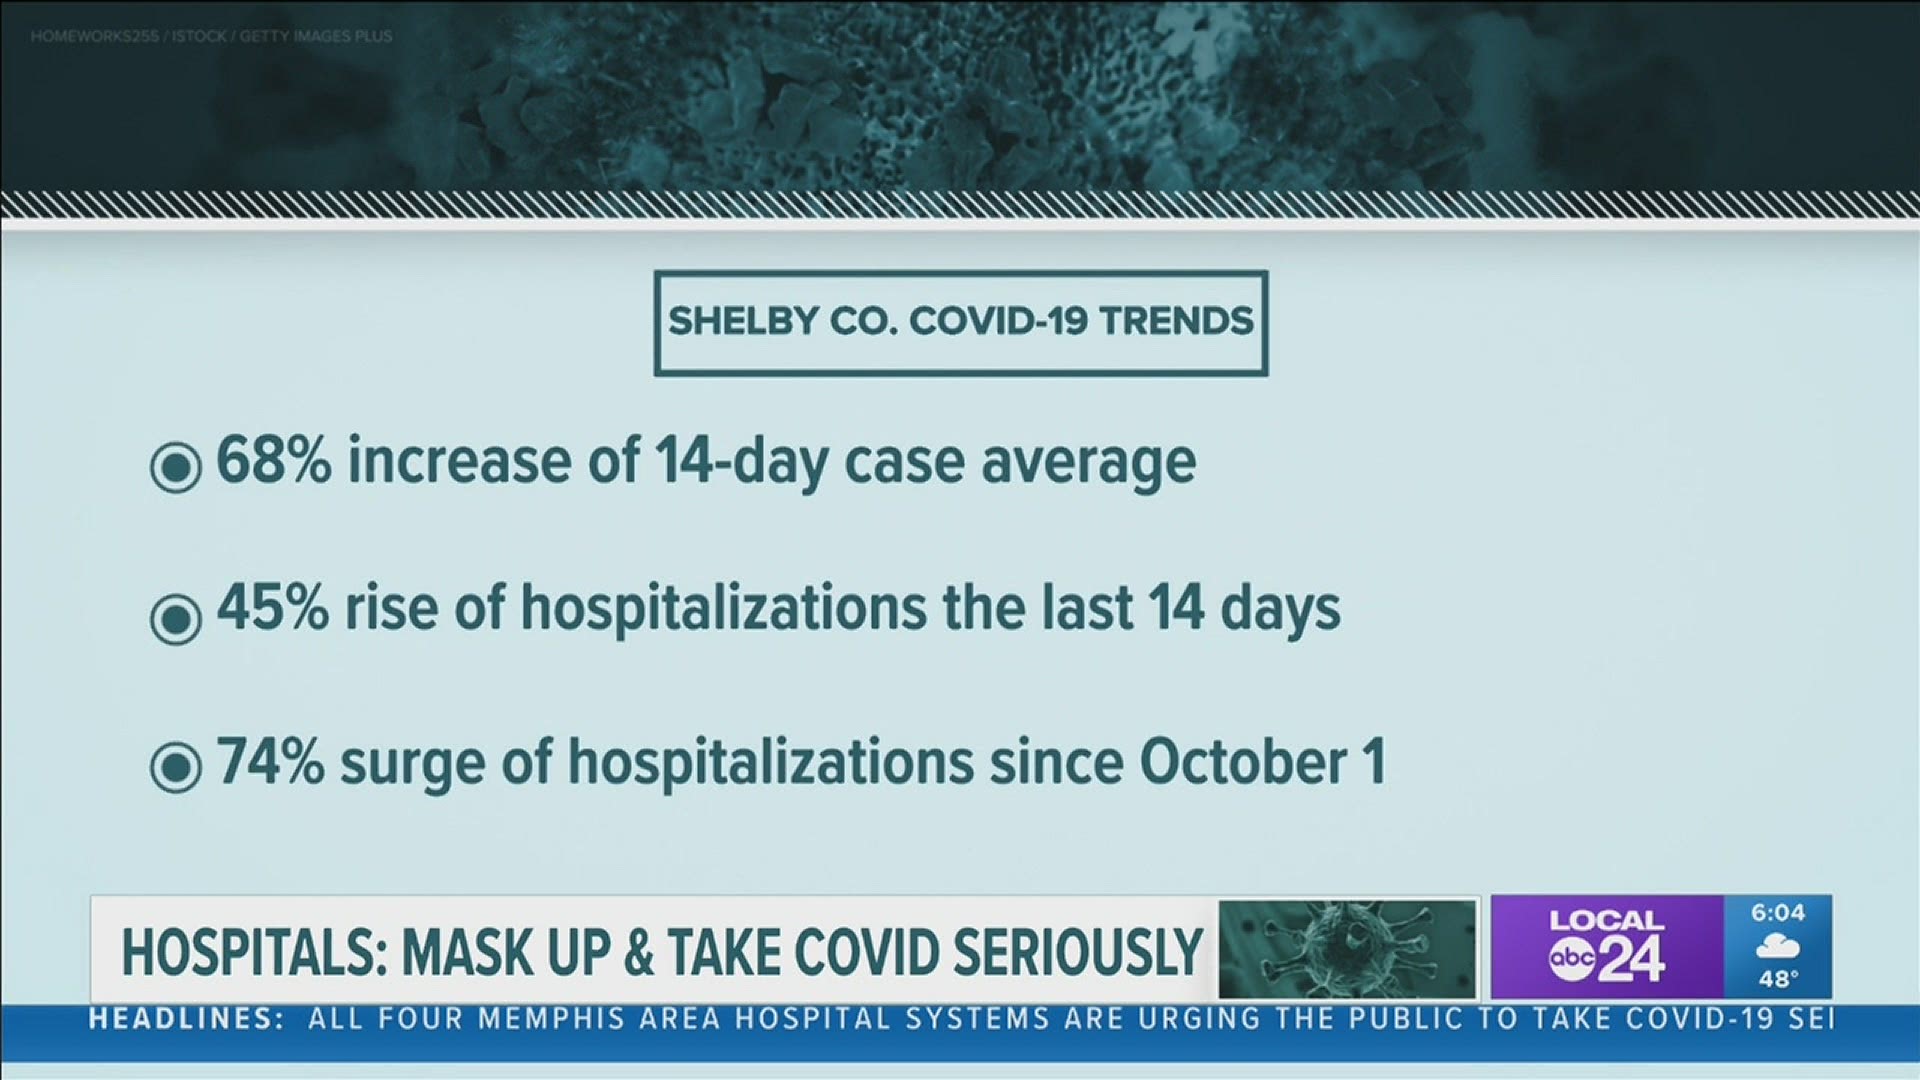 The warnings come as COVID-19 cases and hospitalizations have been surging since October 1st.